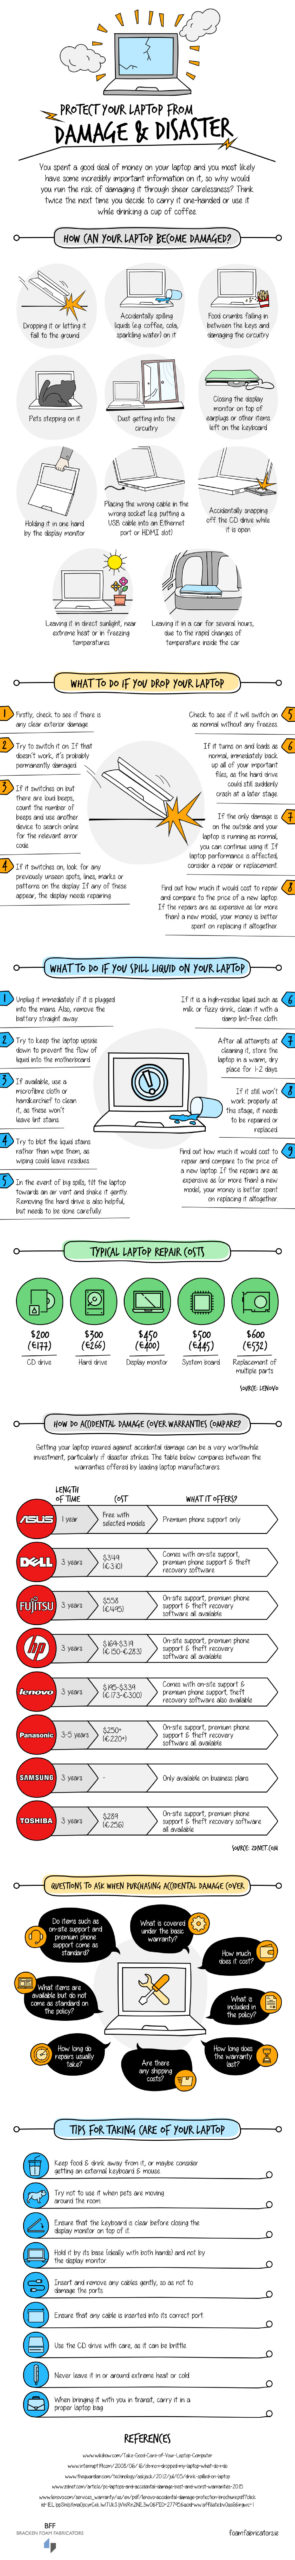 How To Protect Your Laptop from Damage & Disaster – Infographic